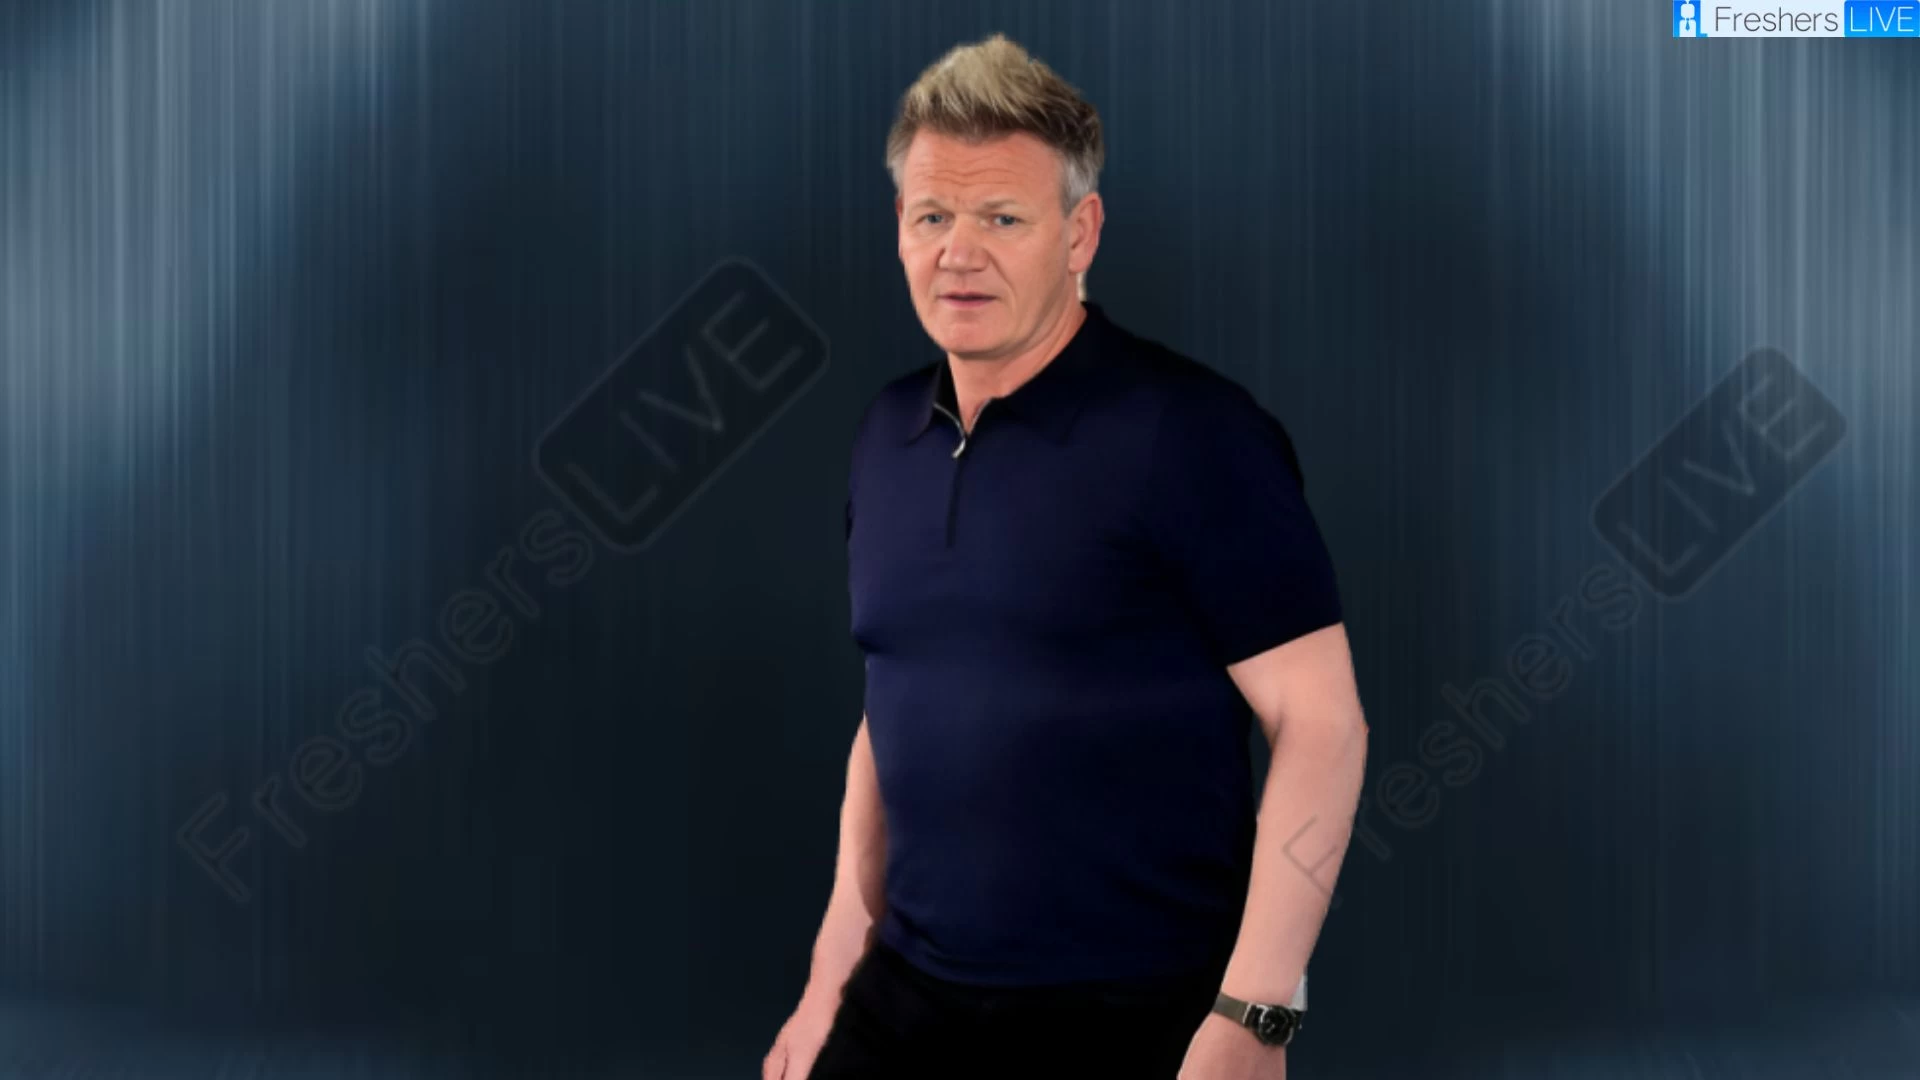 Kitchen Nightmares Season 8 Episode 2 Release Date and Time, Countdown, When is it Coming Out?